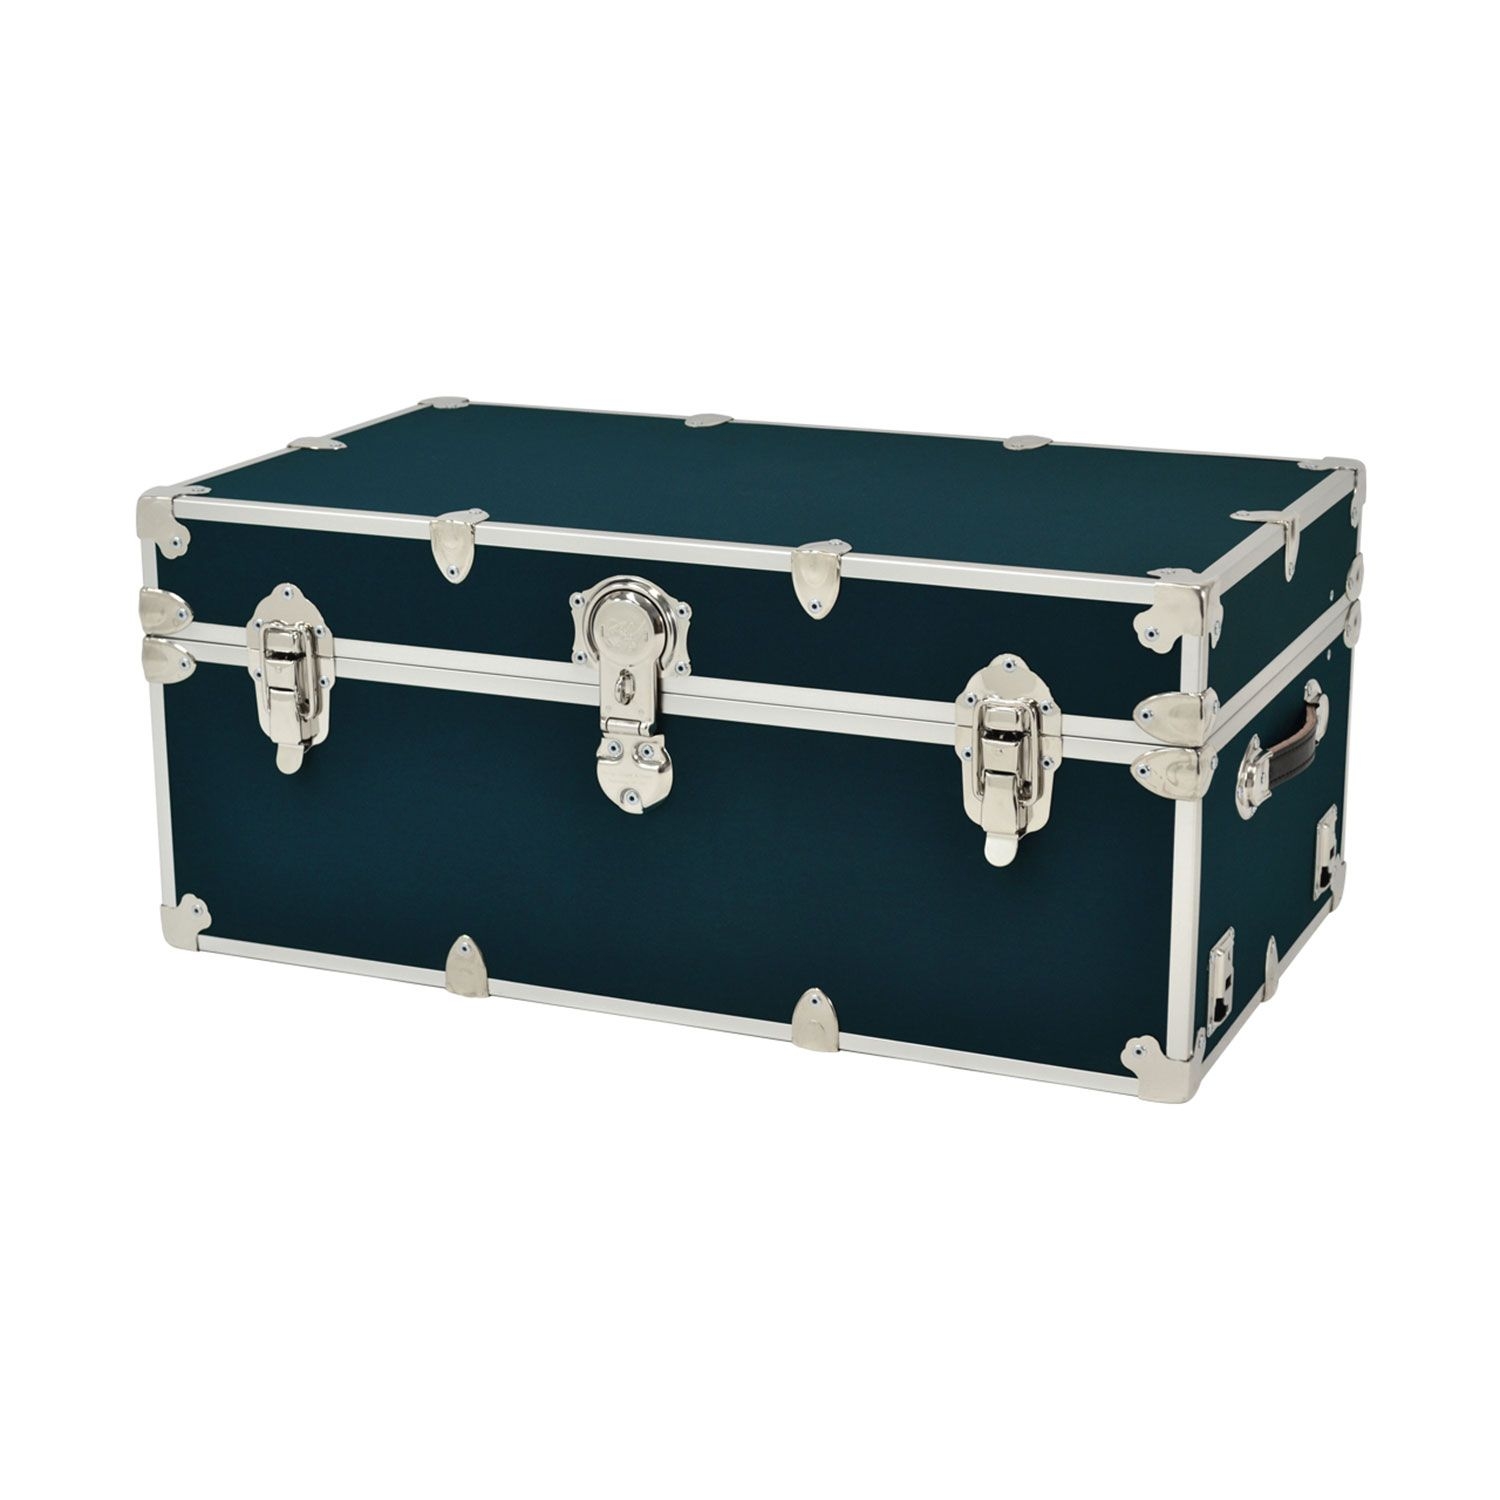 Seward Trunk Seward Under The Bed 31 Trunk With Wheels And, 48% OFF